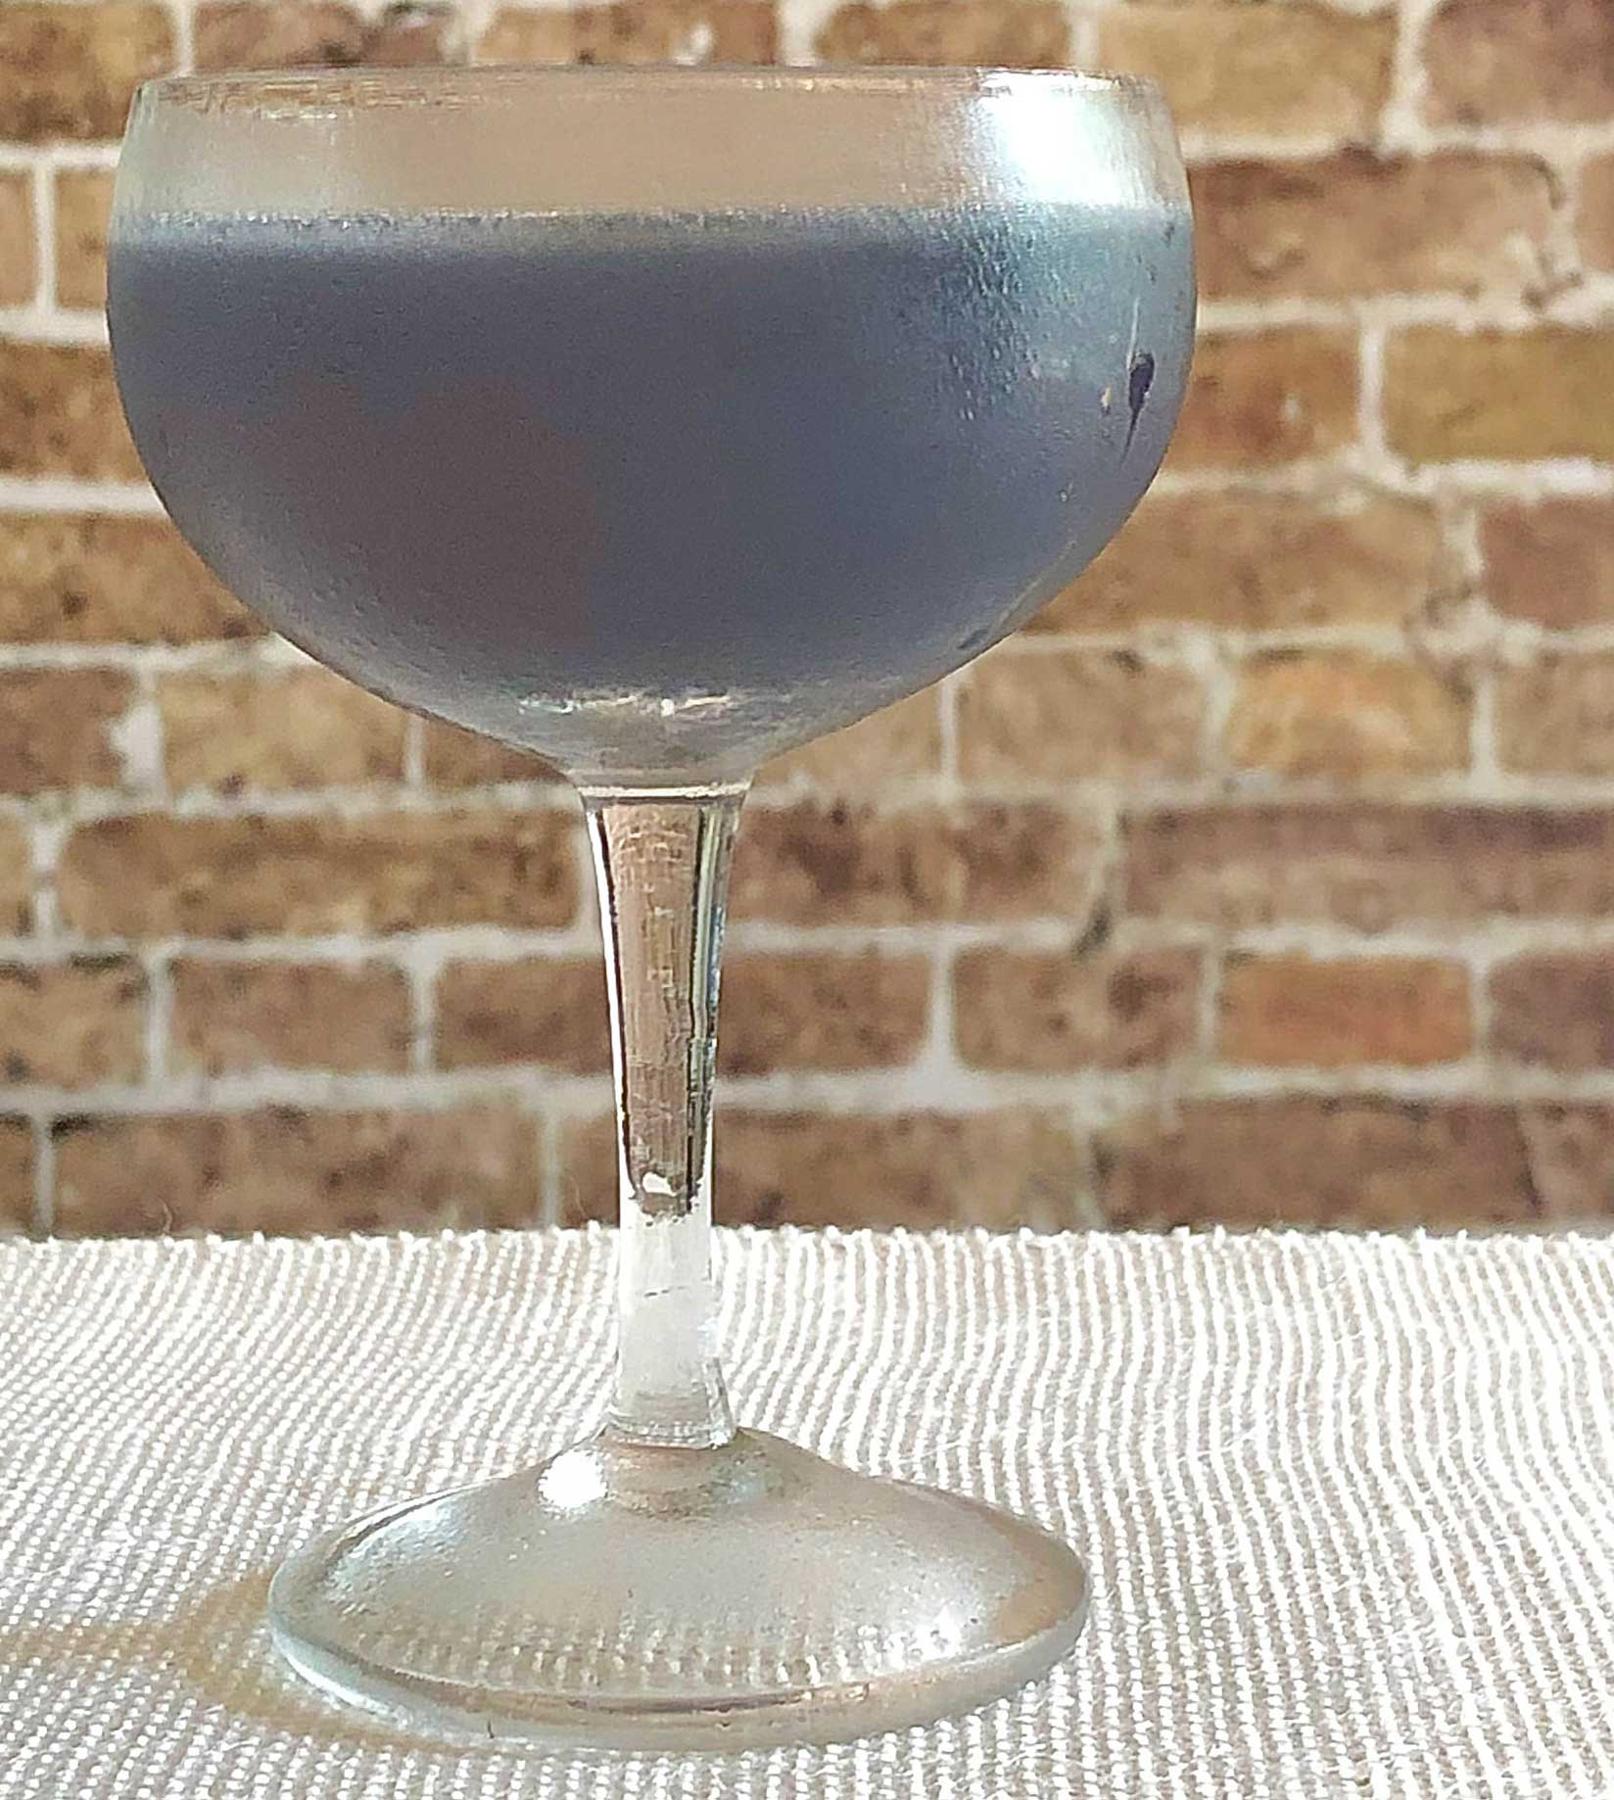 An example of the Blooey Blues, the mixed drink (drink), adapted from a drink from “Pioneers of Mixing at Elite Bars”, featuring light rum, Rothman & Winter Crème de Violette, lime juice, and Mas Peyre Rancio Sec “Le Démon de Midi”; photo by Lee Edwards